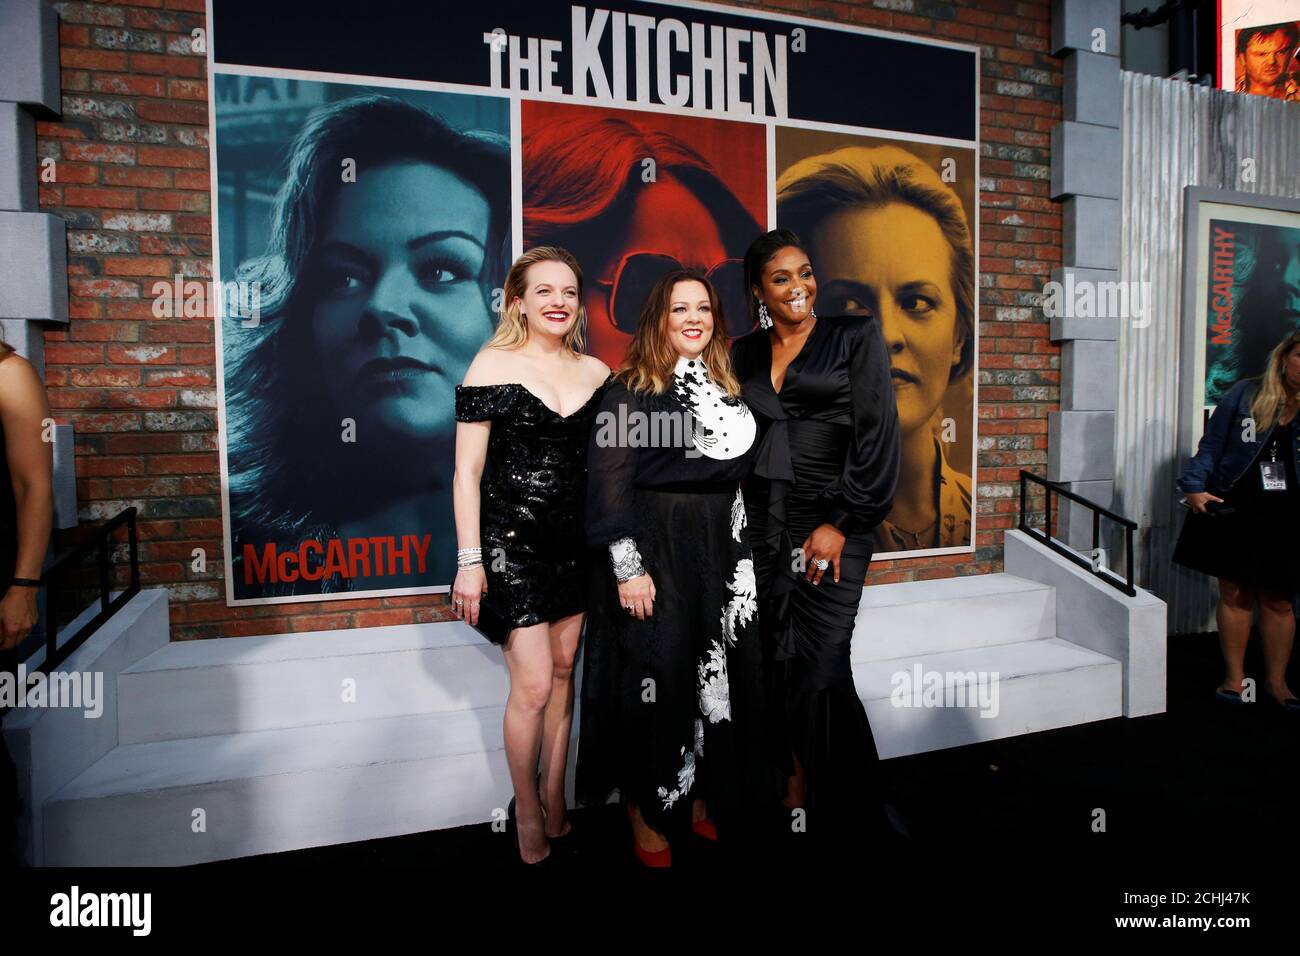 Cast members Tiffany Haddish, Melissa McCarthy and Elisabeth Moss attend the premiere for the movie 'The Kitchen' in Los Angeles, California, U.S., August 5, 2019. REUTERS/Mario Anzuoni Stock Photo